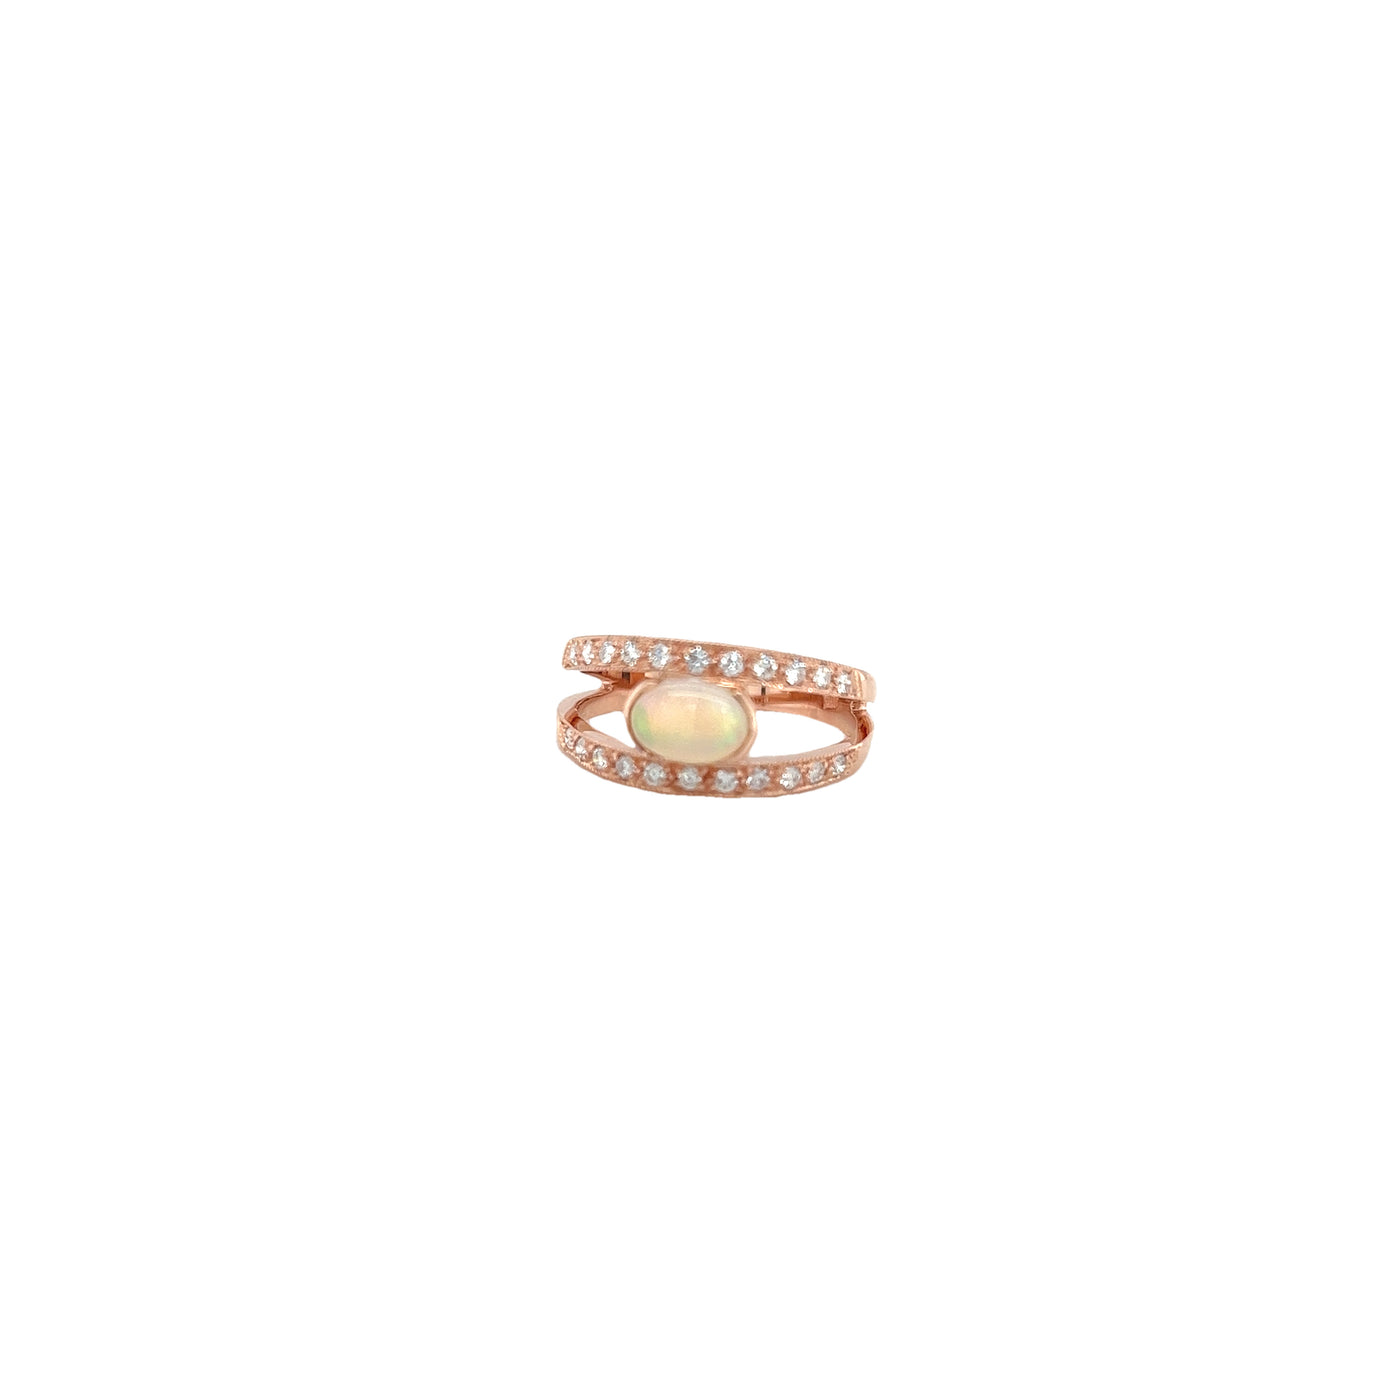 9 CARAT ROSE GOLD RING WITH SOLID OPAL AND DIAMONDSOPAL AD 